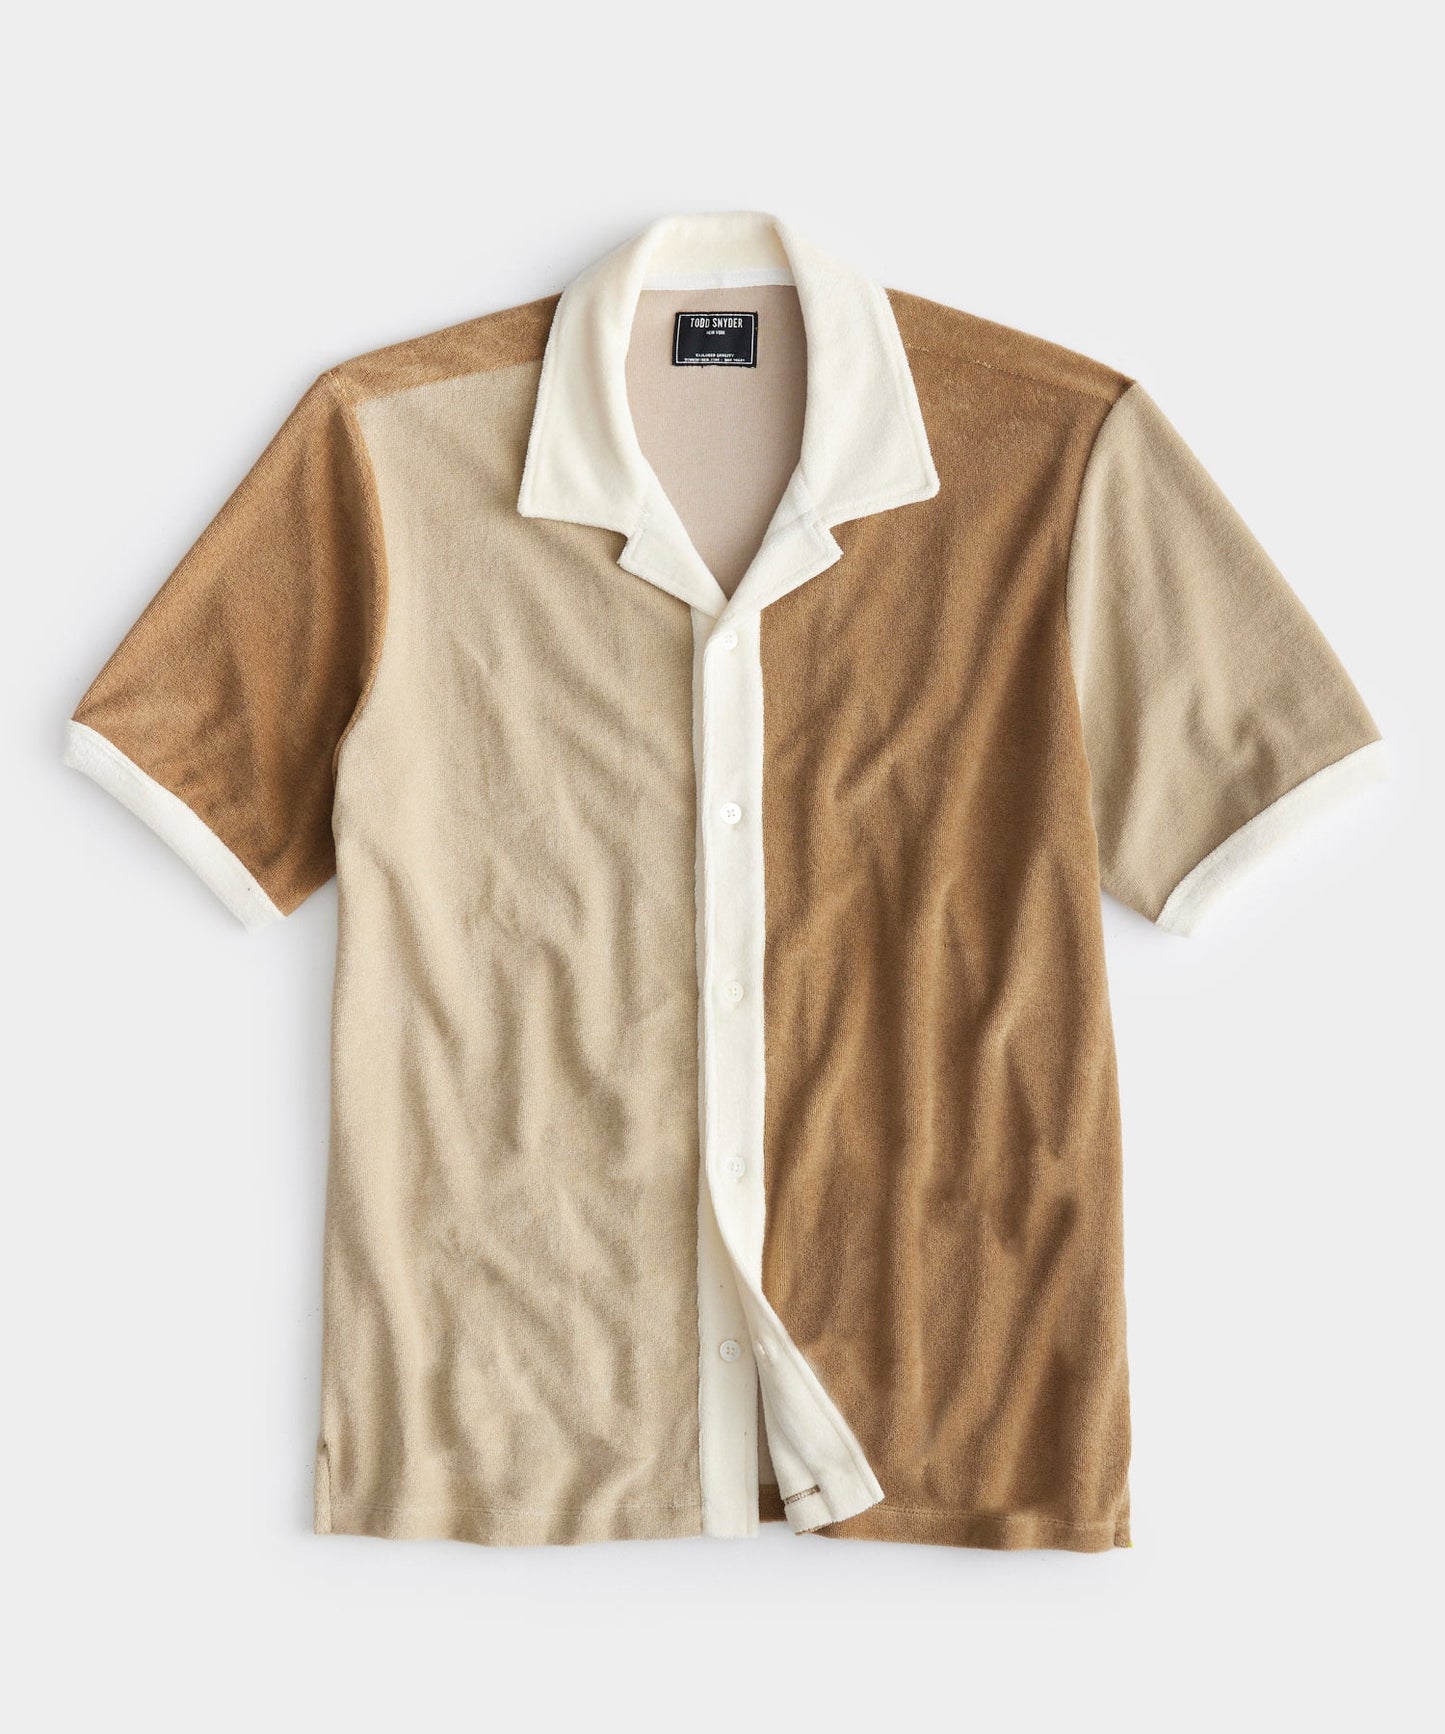 Todd Snyder - TODD SNYDER TERRY CABANA BEACH POLO IN DARK WHEAT - Rent With Thred